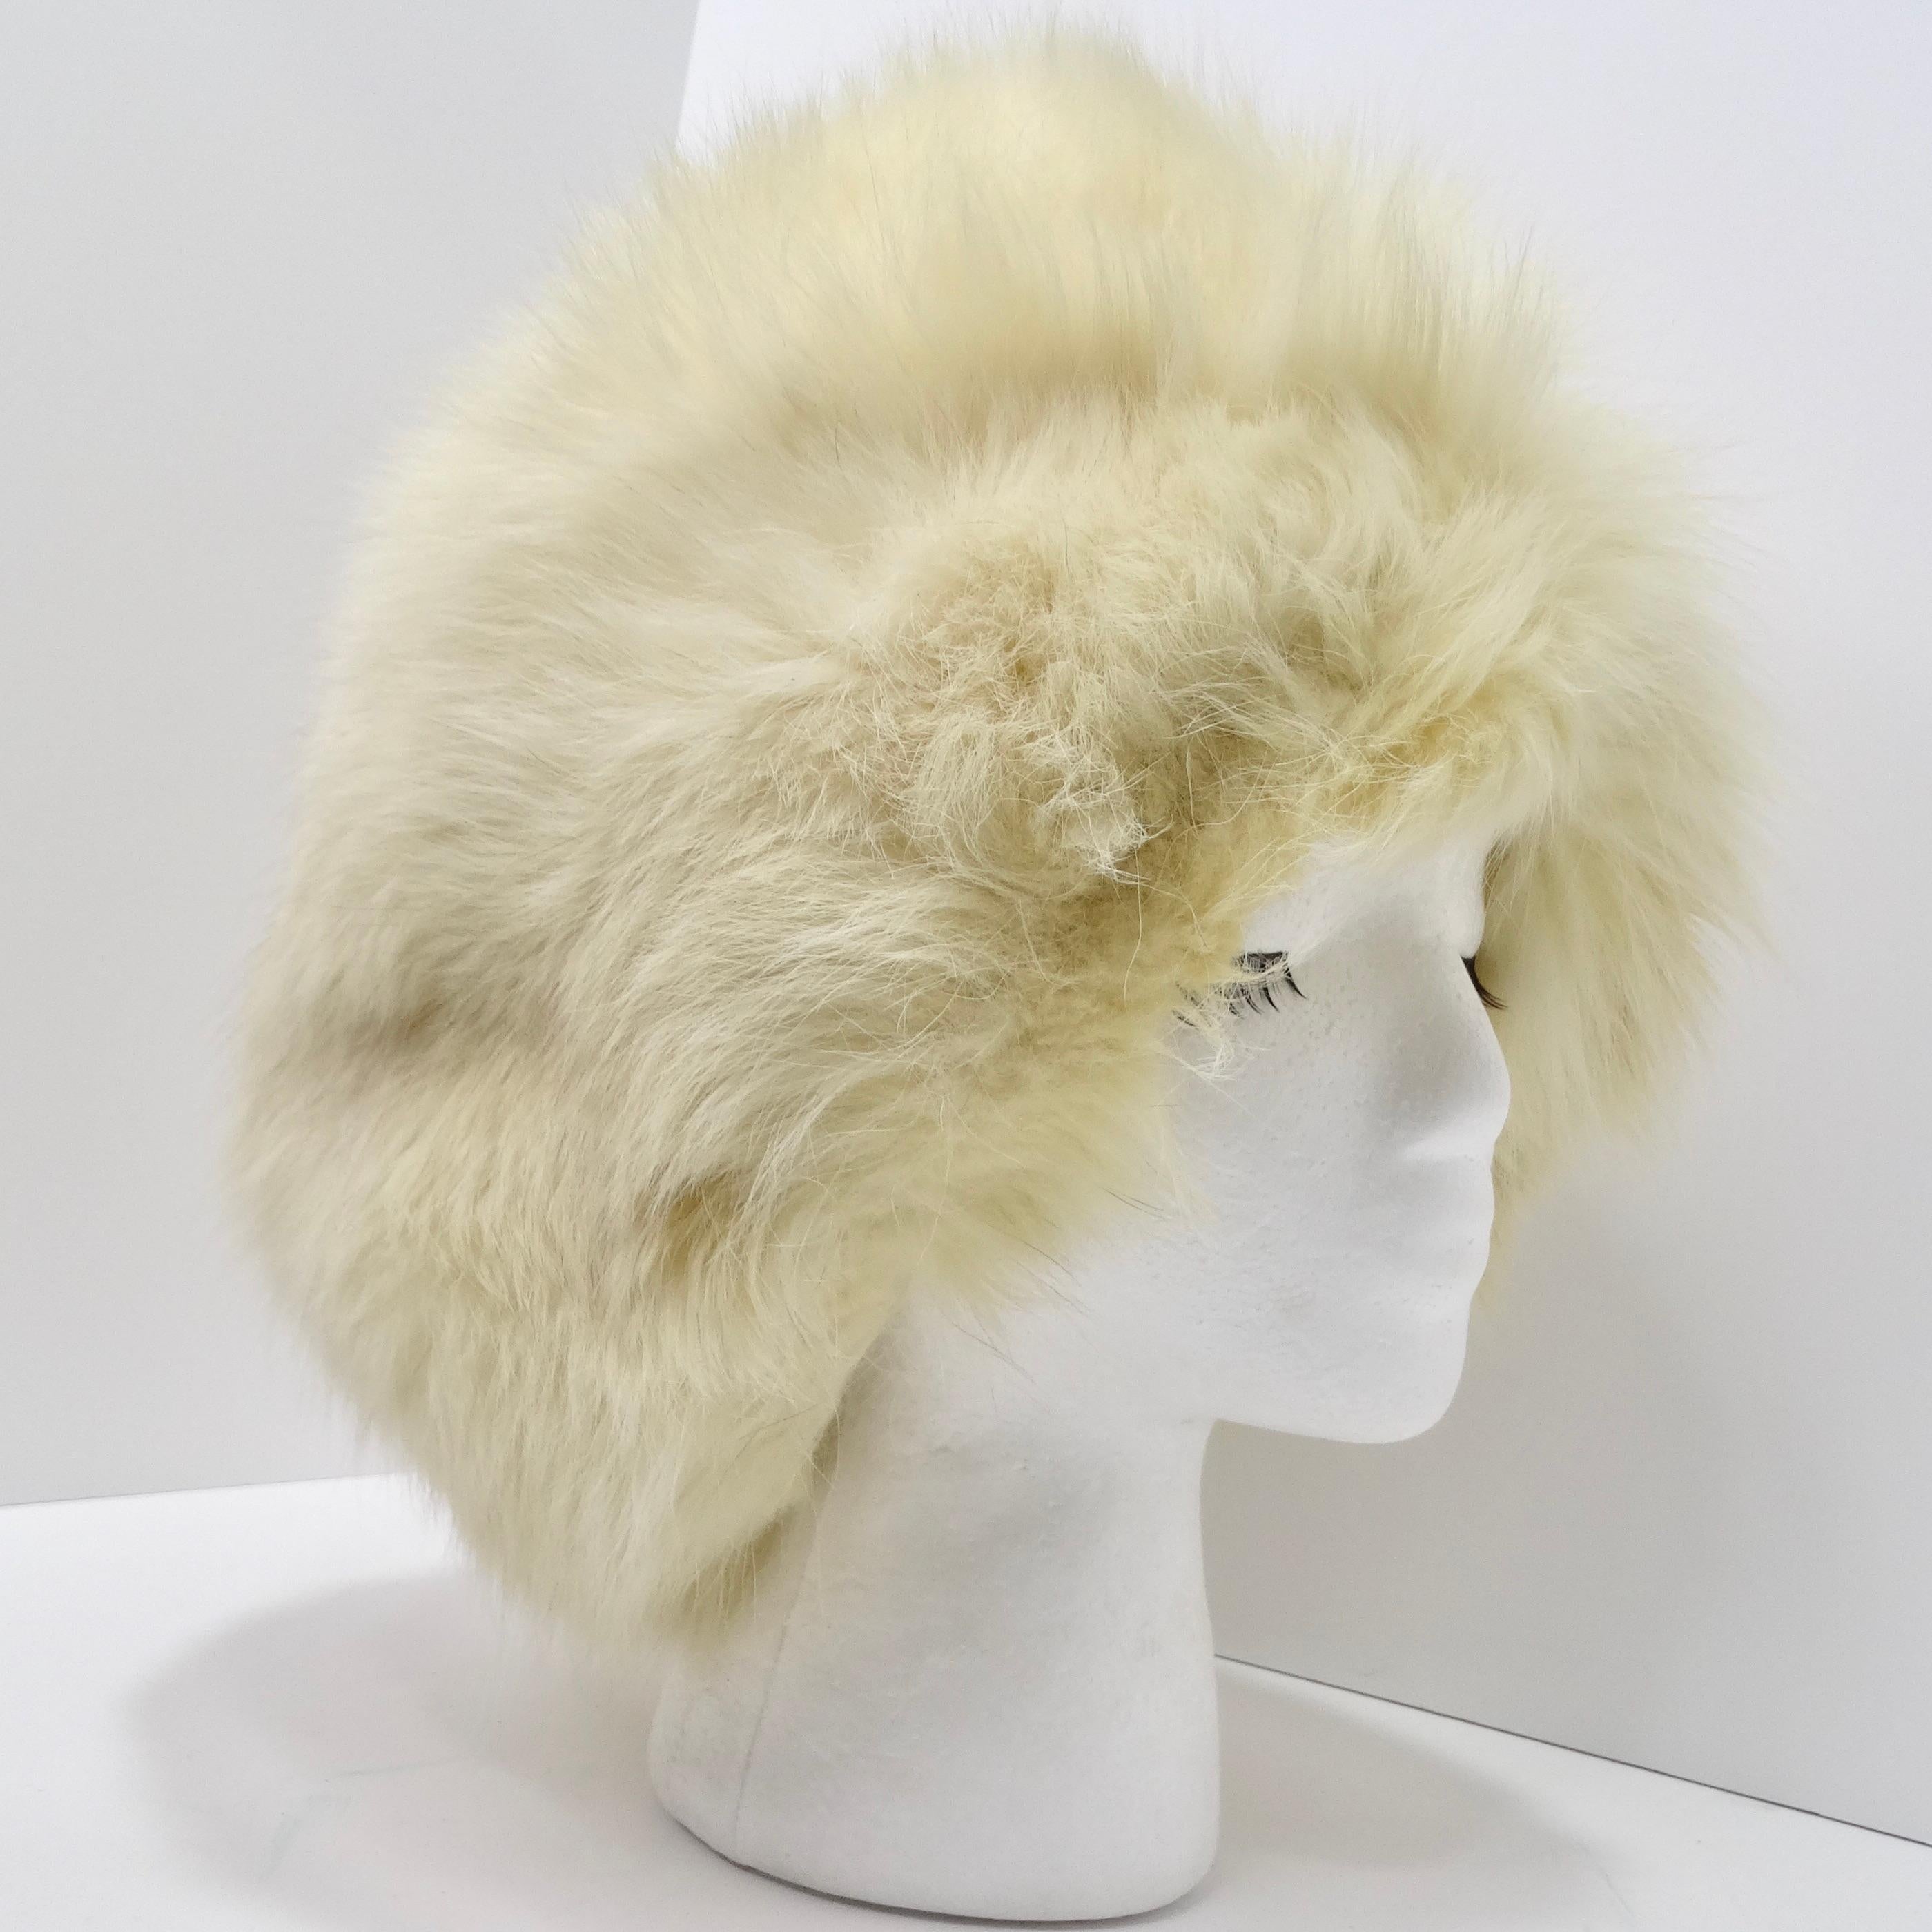 Do not miss out on this incredible vintage Christian Dior fur hat ! This gorgeous fur cap is sooo reminiscent of another era! The cap style is truly so chic and this ivory white color gives it such an elegant and regal feel. Style this with a Gucci